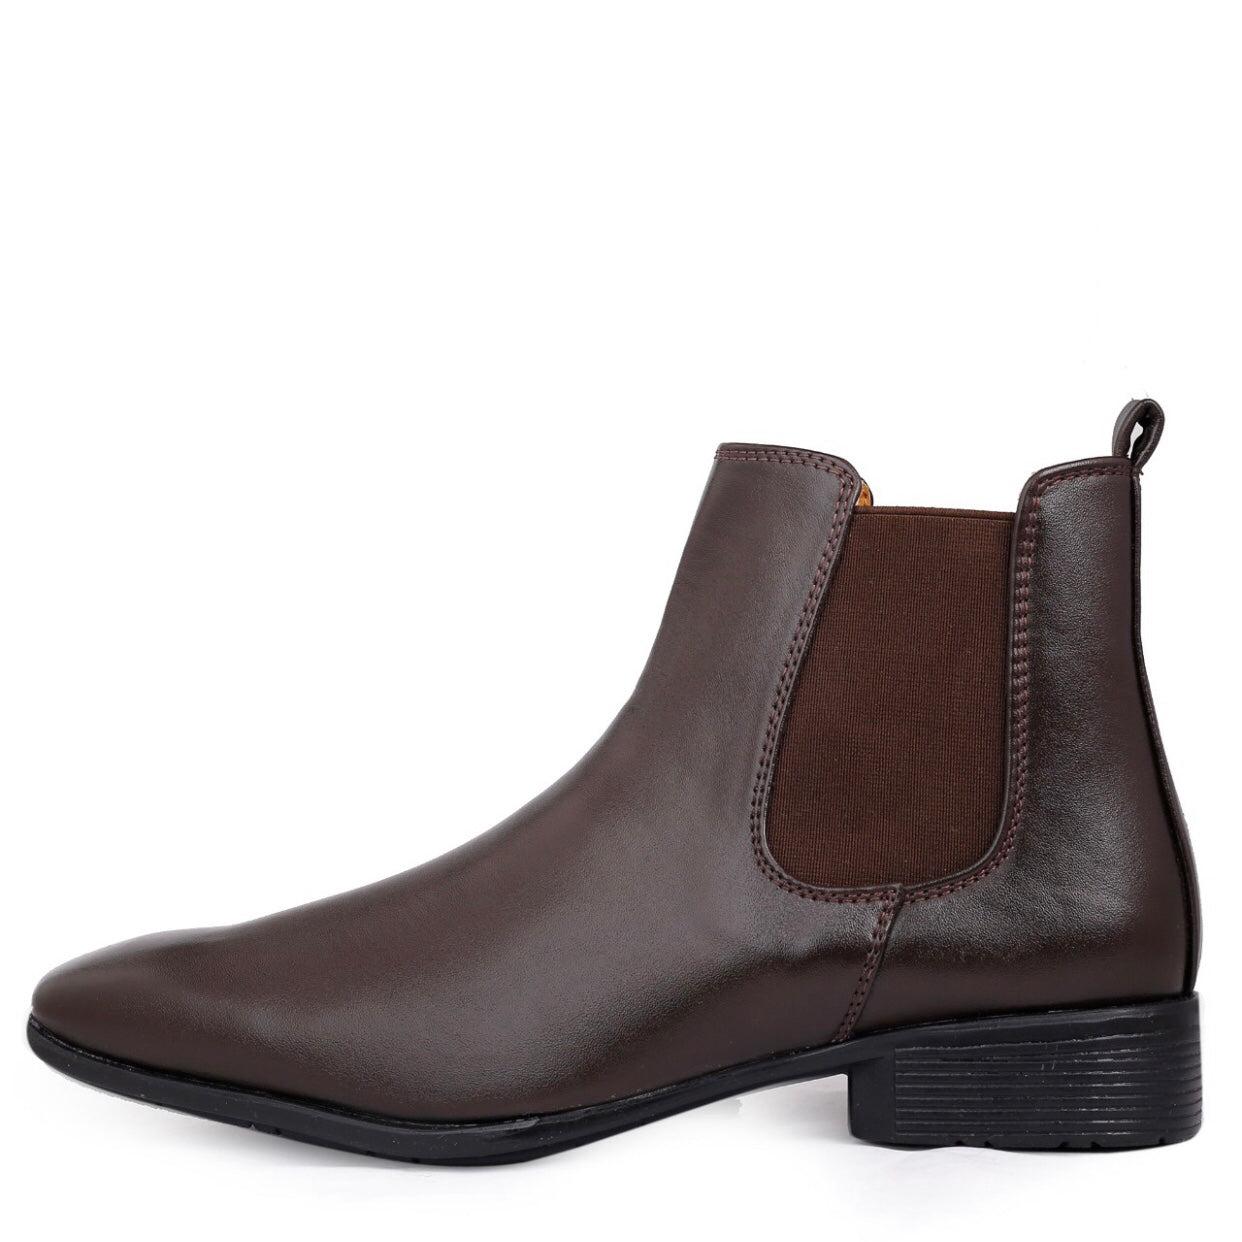 New Men's Stylish Formal and Casual Wear British Chelsea Ankle Boots